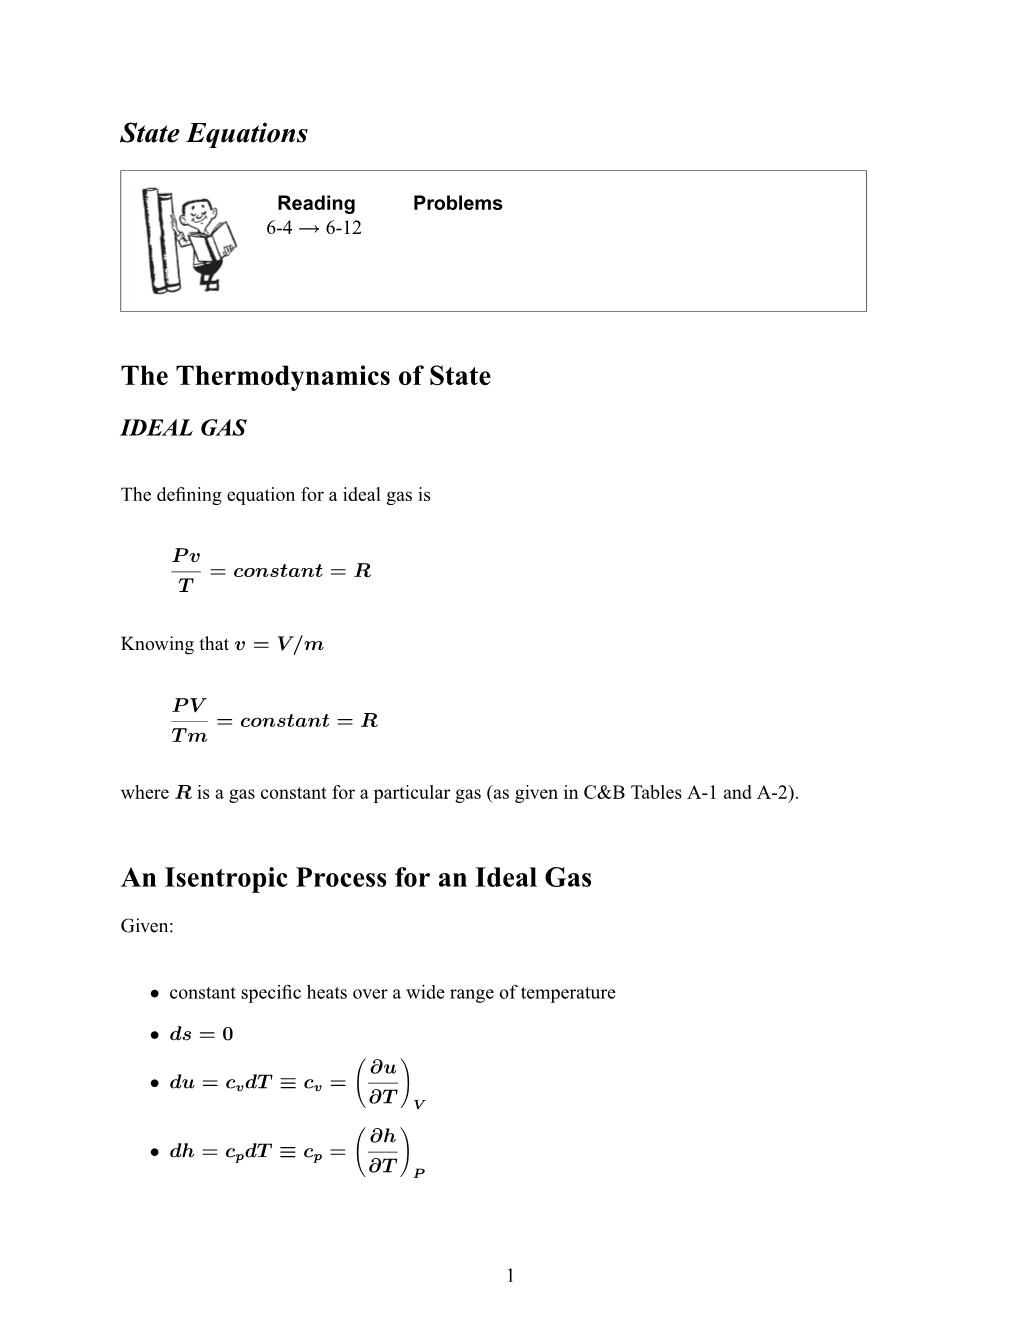 State Equations the Thermodynamics of State an Isentropic Process For